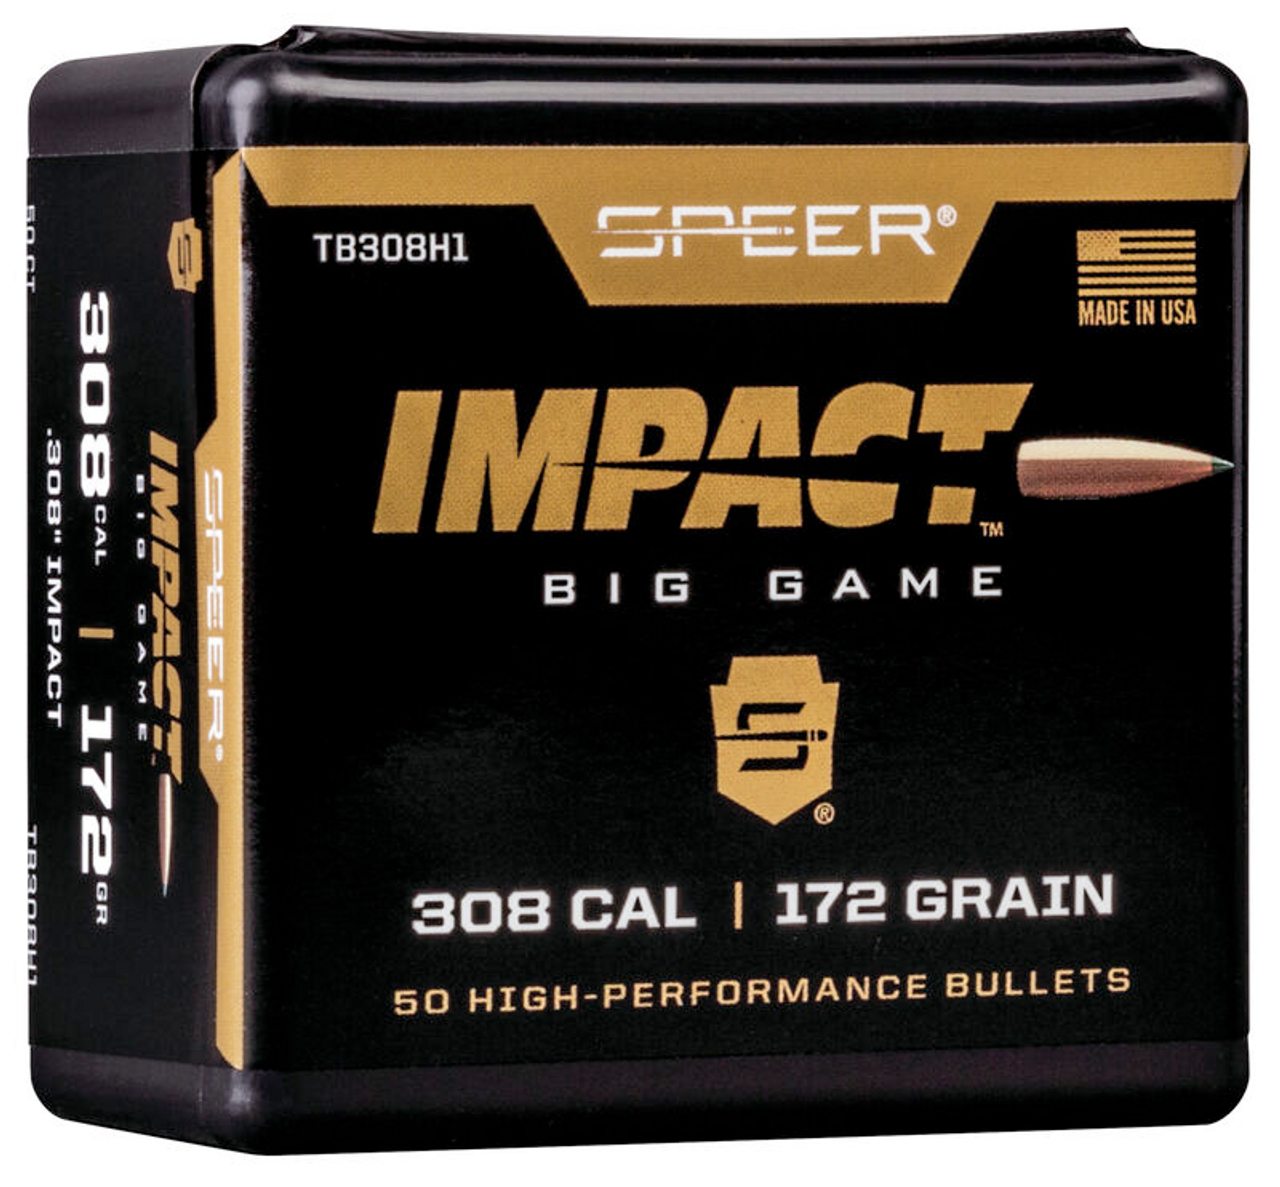 Speer 308  Win, 172 Grain, Tipped Plated Copper Bonded, Box of 50